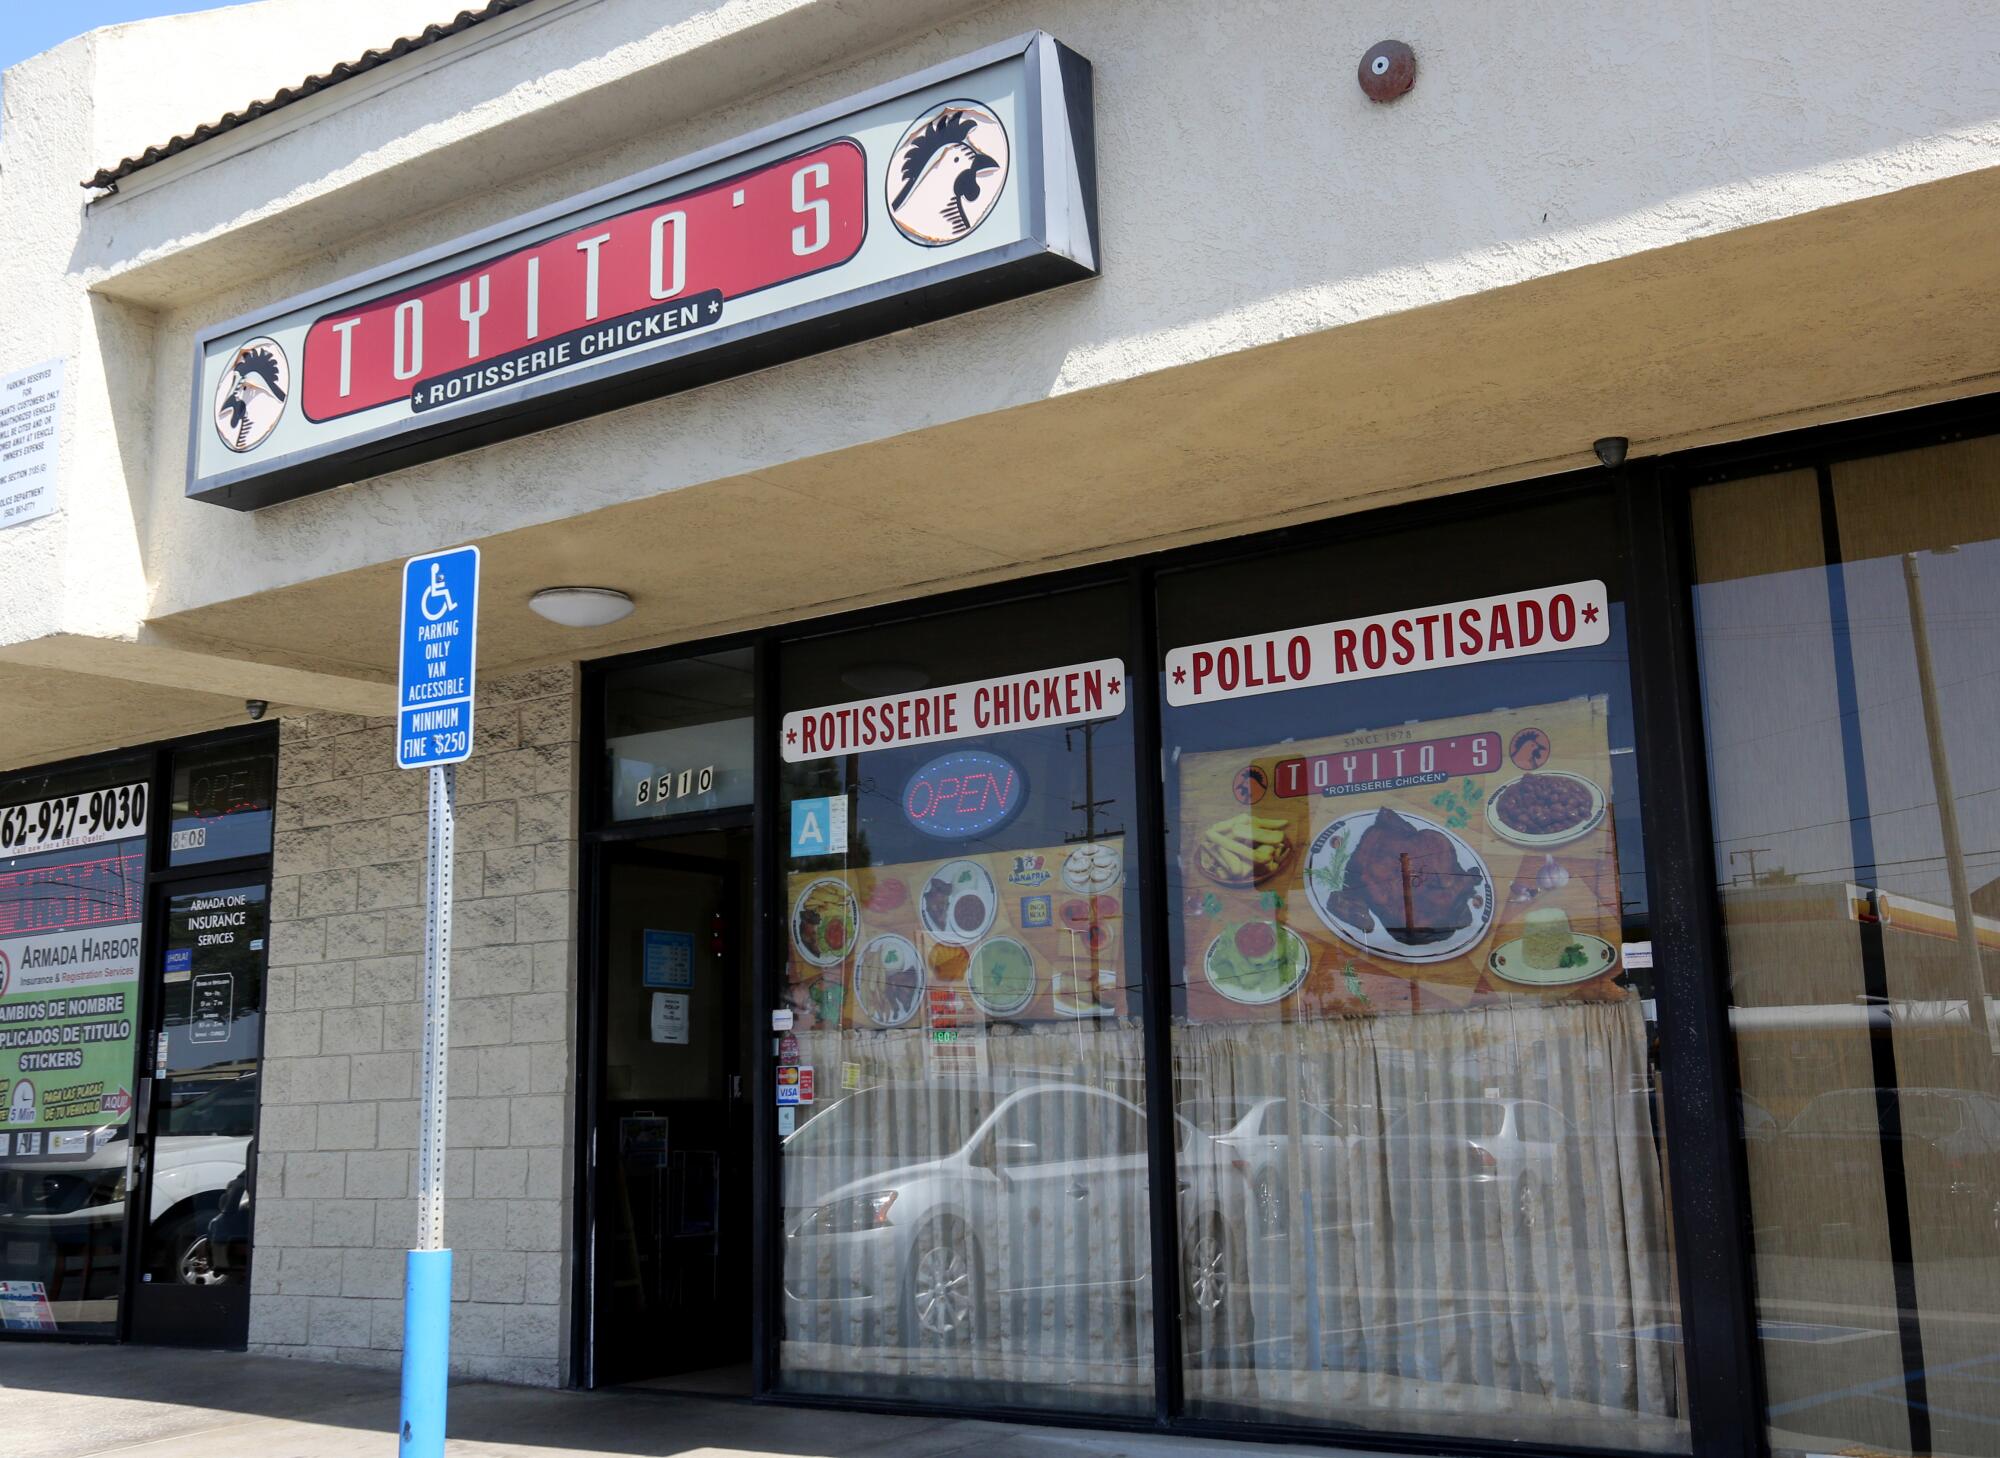 Toyito's Rotisserie Chicken on the 8500 block of Paramount Boulevard in Downey.